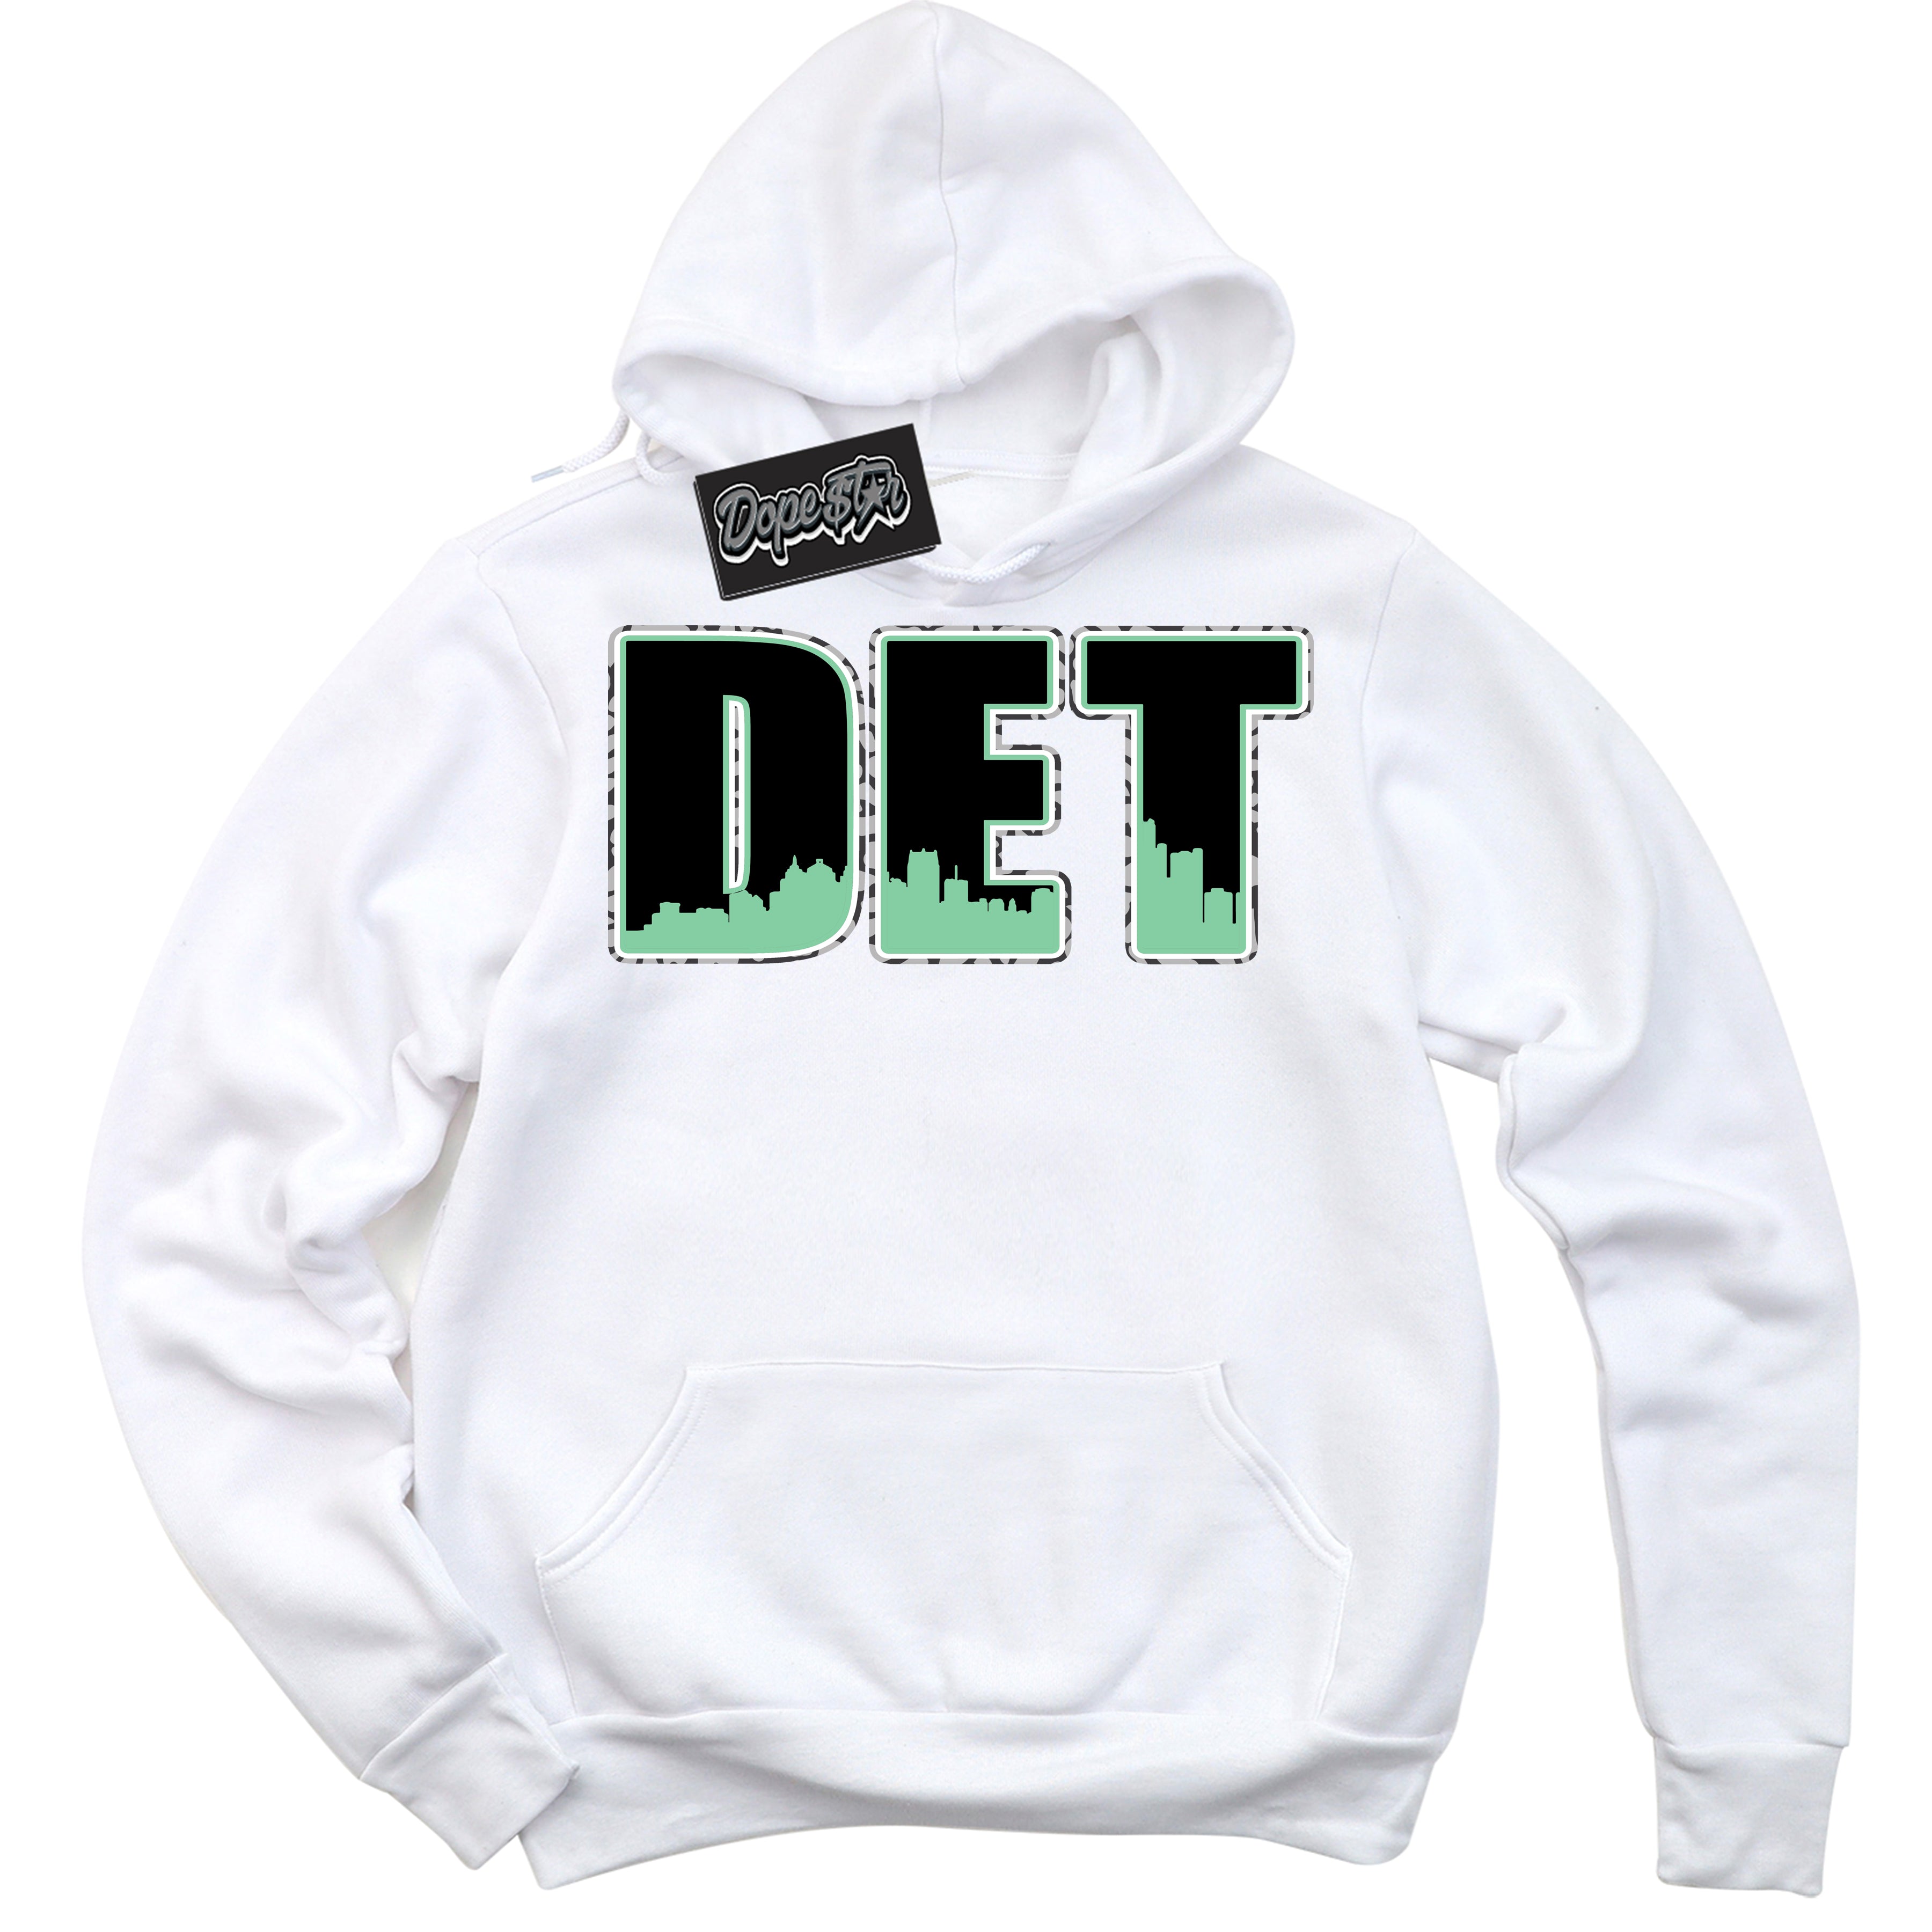 Cool White Graphic DopeStar Hoodie with “ Detroit “ print, that perfectly matches Green Glow 3s sneakers